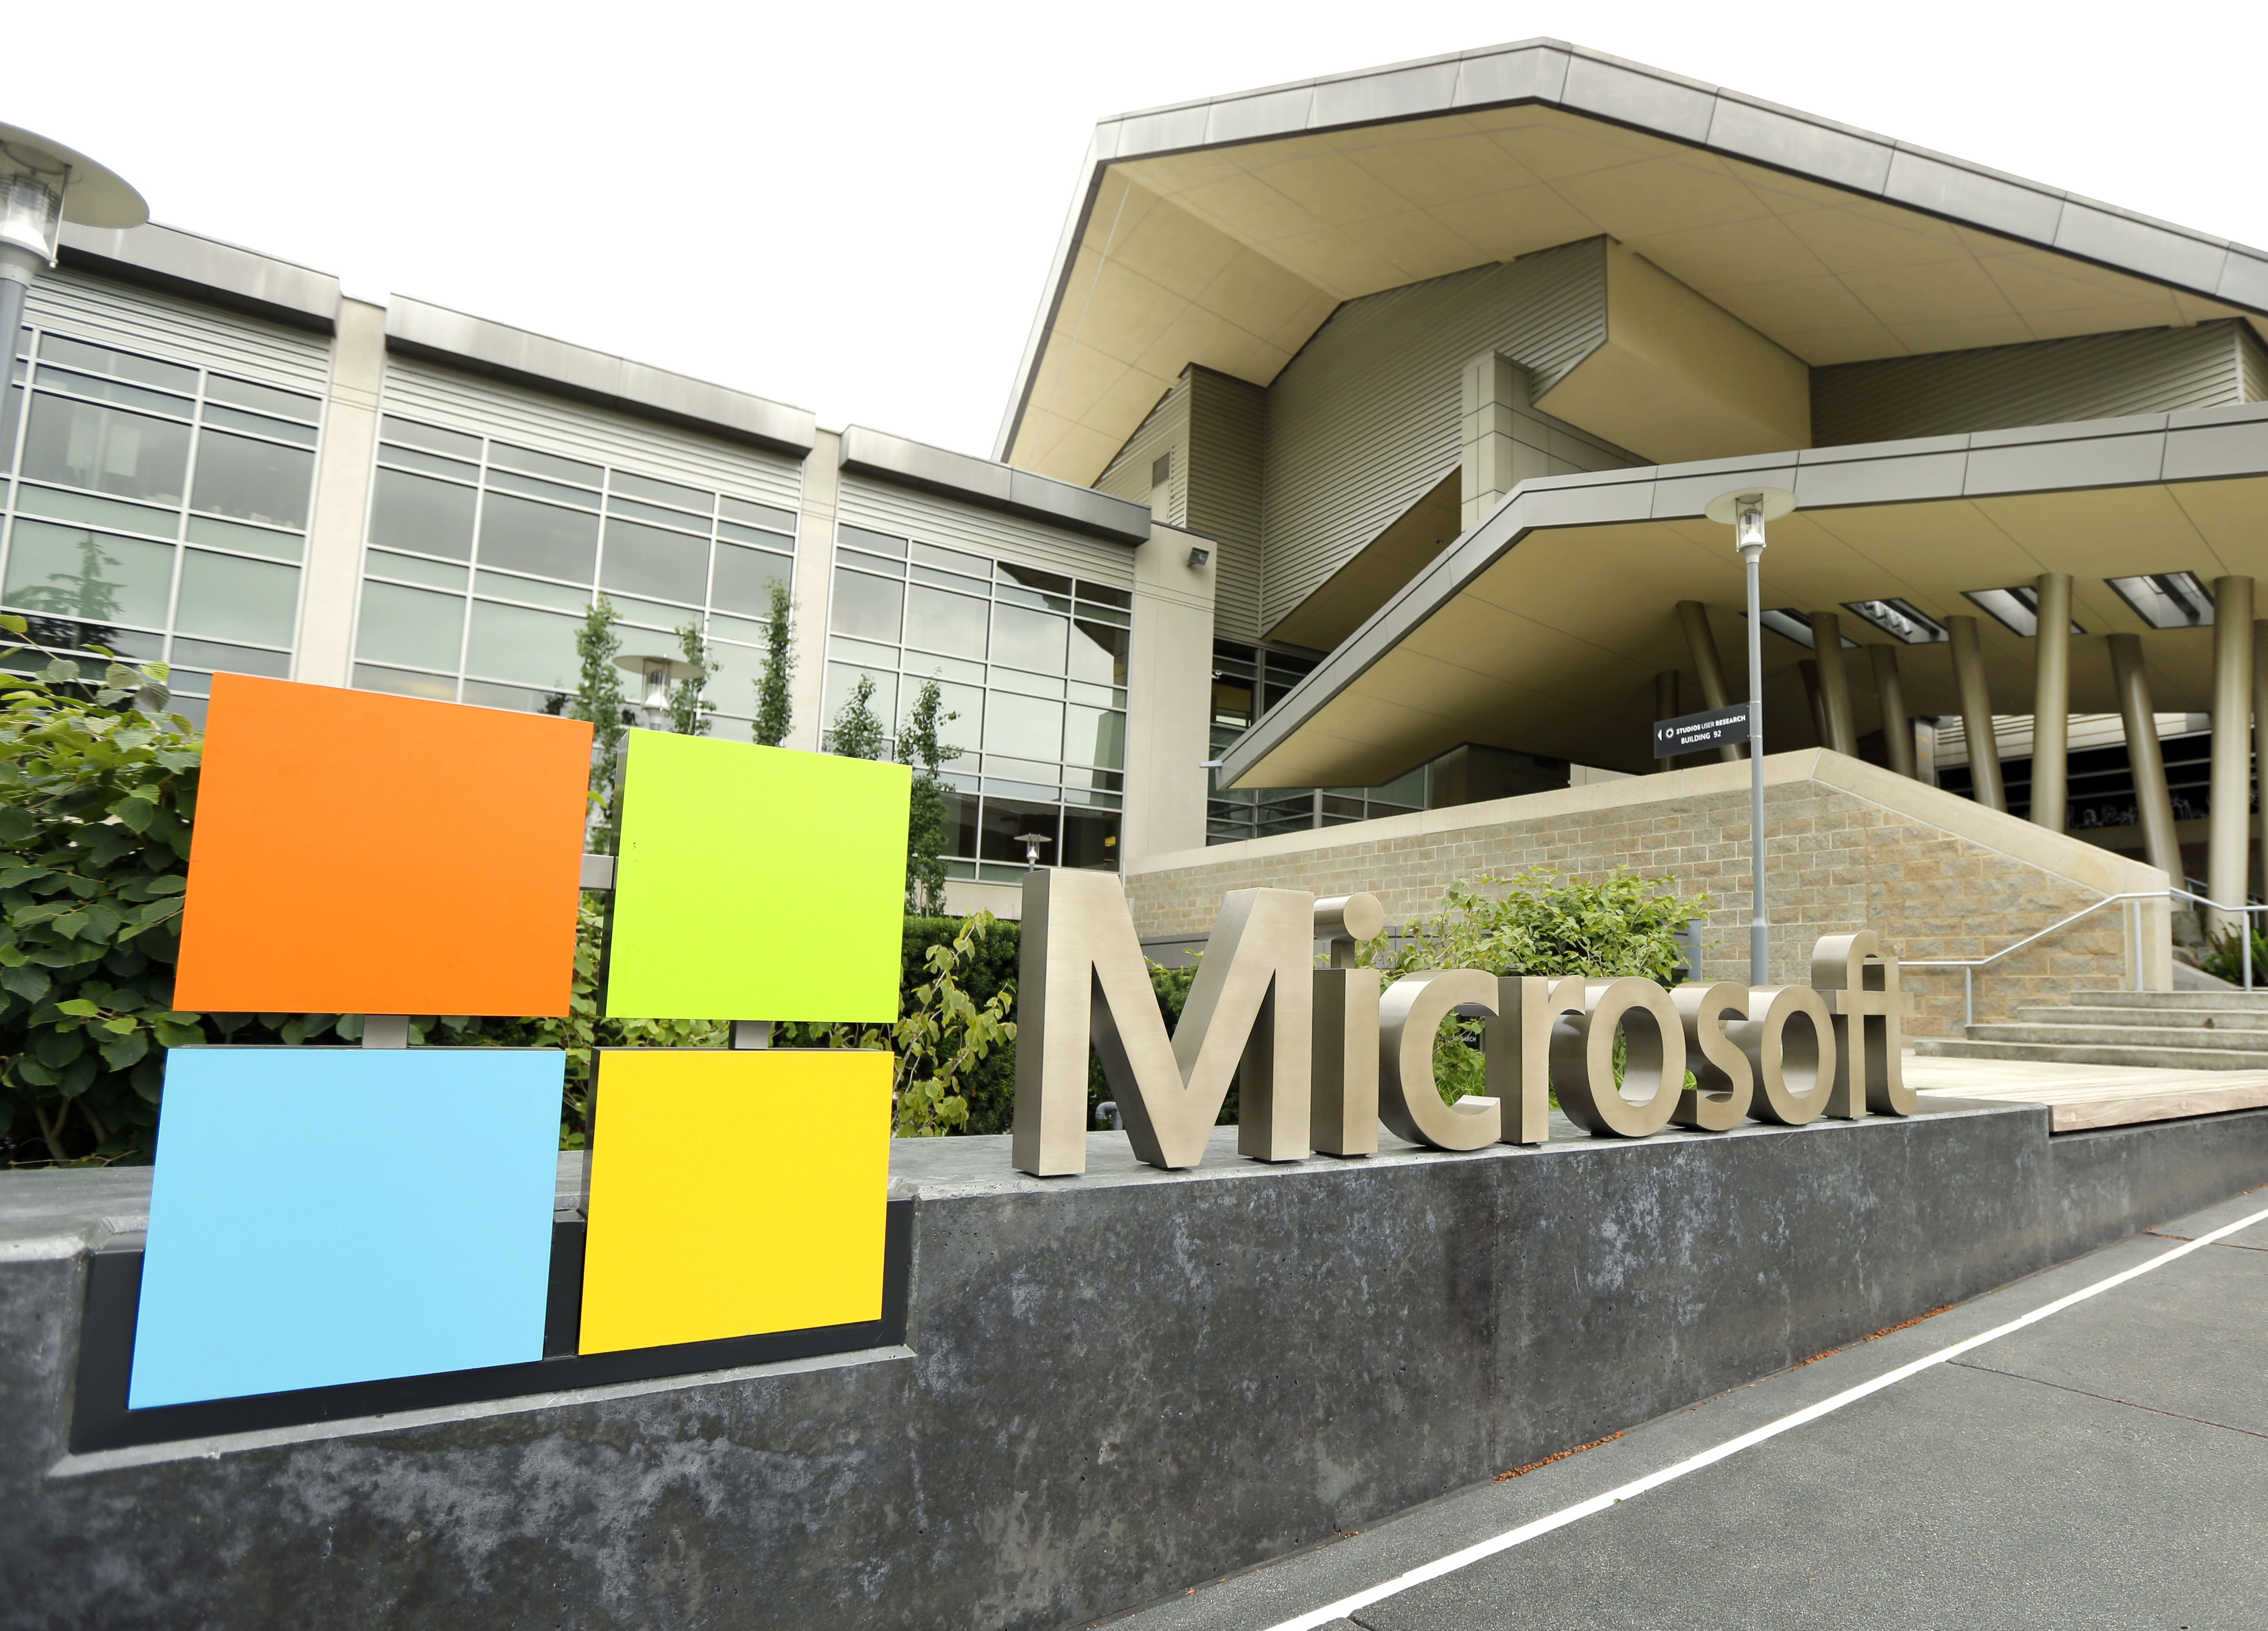 FILE - This July 3, 2014 file photo shows Microsoft Corp. signage outside the Microsoft Visitor Center in Redmond, Wash. (AP Photo Ted S. Warren, File)